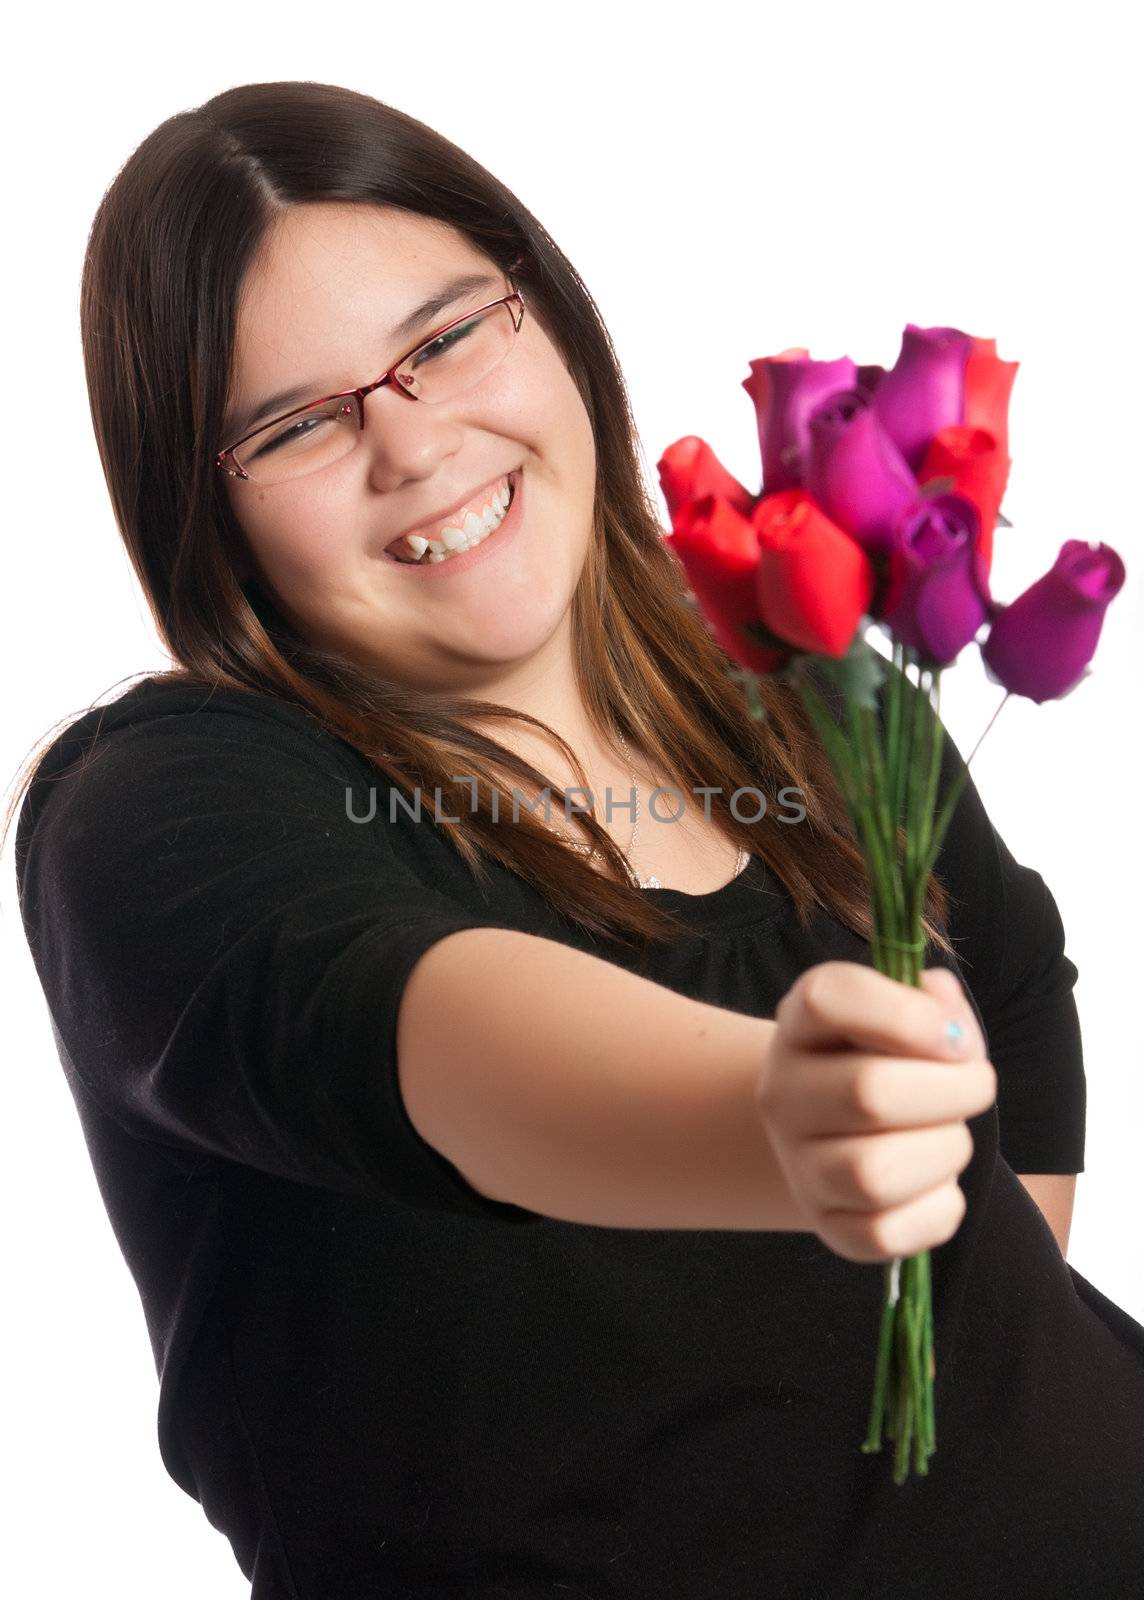 A young girl is either giving or receiving a small bouquet of roses, isolated against a white background.